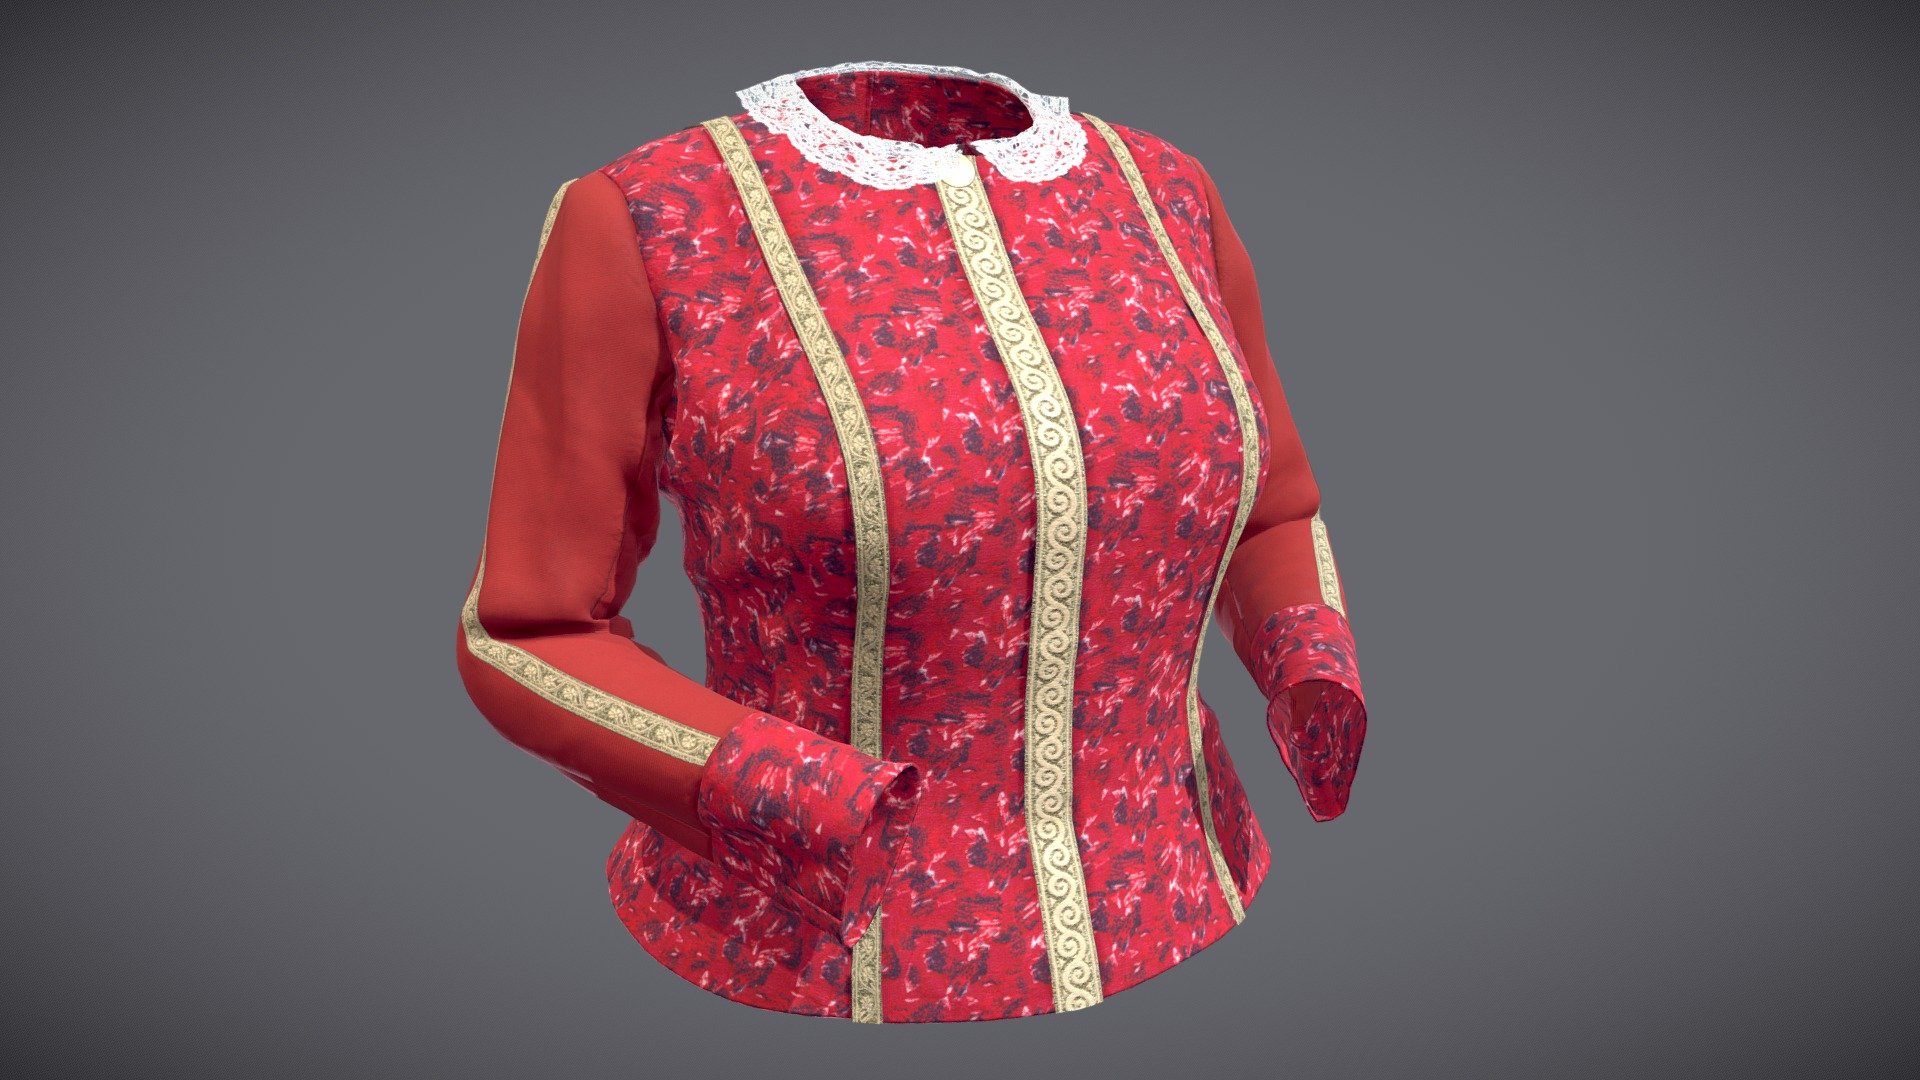 The 3D model presents a digital twin of a theatrical costume for a play by A.N. Ostrovsky. The garment was modelled by using historical block patterns, 2D scans of textile materials and 3d scans of contemporary actors. Anthroscan, Clo3D, 3dsMax, PixPaint and SubstancePainter software programs were applied.

The authors of the 3D model are Aleksei Moskvin  and Mariia Moskvina  (Saint Petersburg State University of Industrial Technologies and Design).

The authors thank prof. Victor Kuzmichev (Ivanovo State Polytechnic University), faculty members and students of Ivanovo State Polytechnic University and their colleagues from Ivanovo State Museum of Local History named after D.G. Burylin for providing data required for 3D modelling.

Find more historical costumes at
https://sketchfab.com/alekseimoskvin1
https://sketchfab.com/mariia89
https://sketchfab.com/K_SH_I_IVGPU
https://independent.academia.edu/AlekseiMoskvin
https://www.researchgate.net/profile/Aleksei-Moskvin - 1861 Jacket (Belotelova) - Download Free 3D model by Aleksei Moskvin (@alekseimoskvin1) 3d model